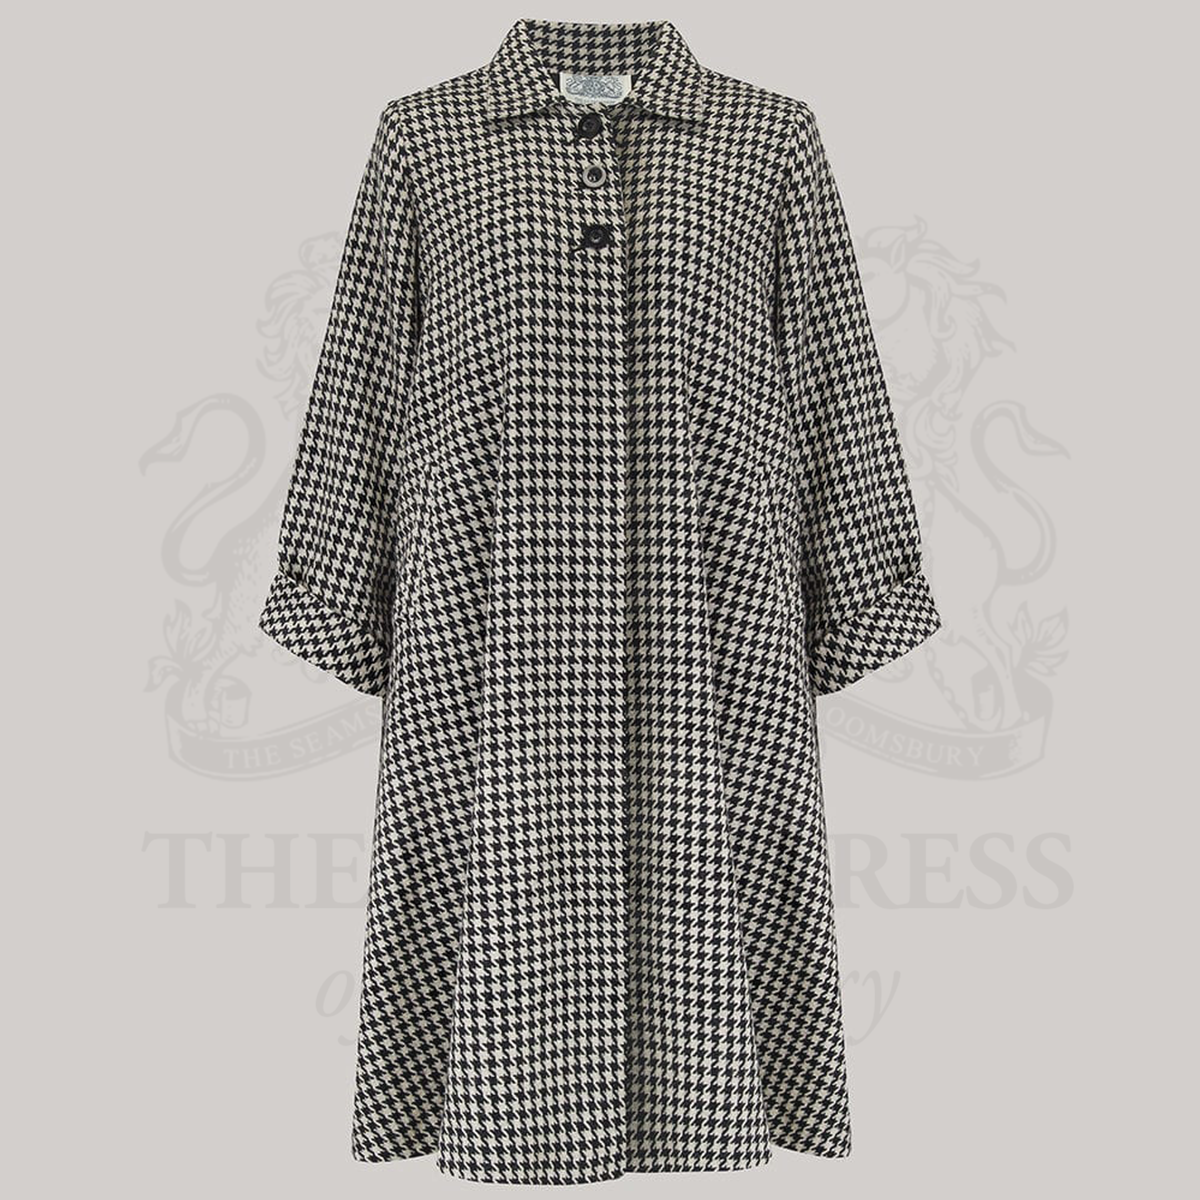 A 1940s style 43 inch long swing jacket. The jacket is in black and white houndstooth print, has three buttons at the top front, small shoulder pads, and is lined in satin. 